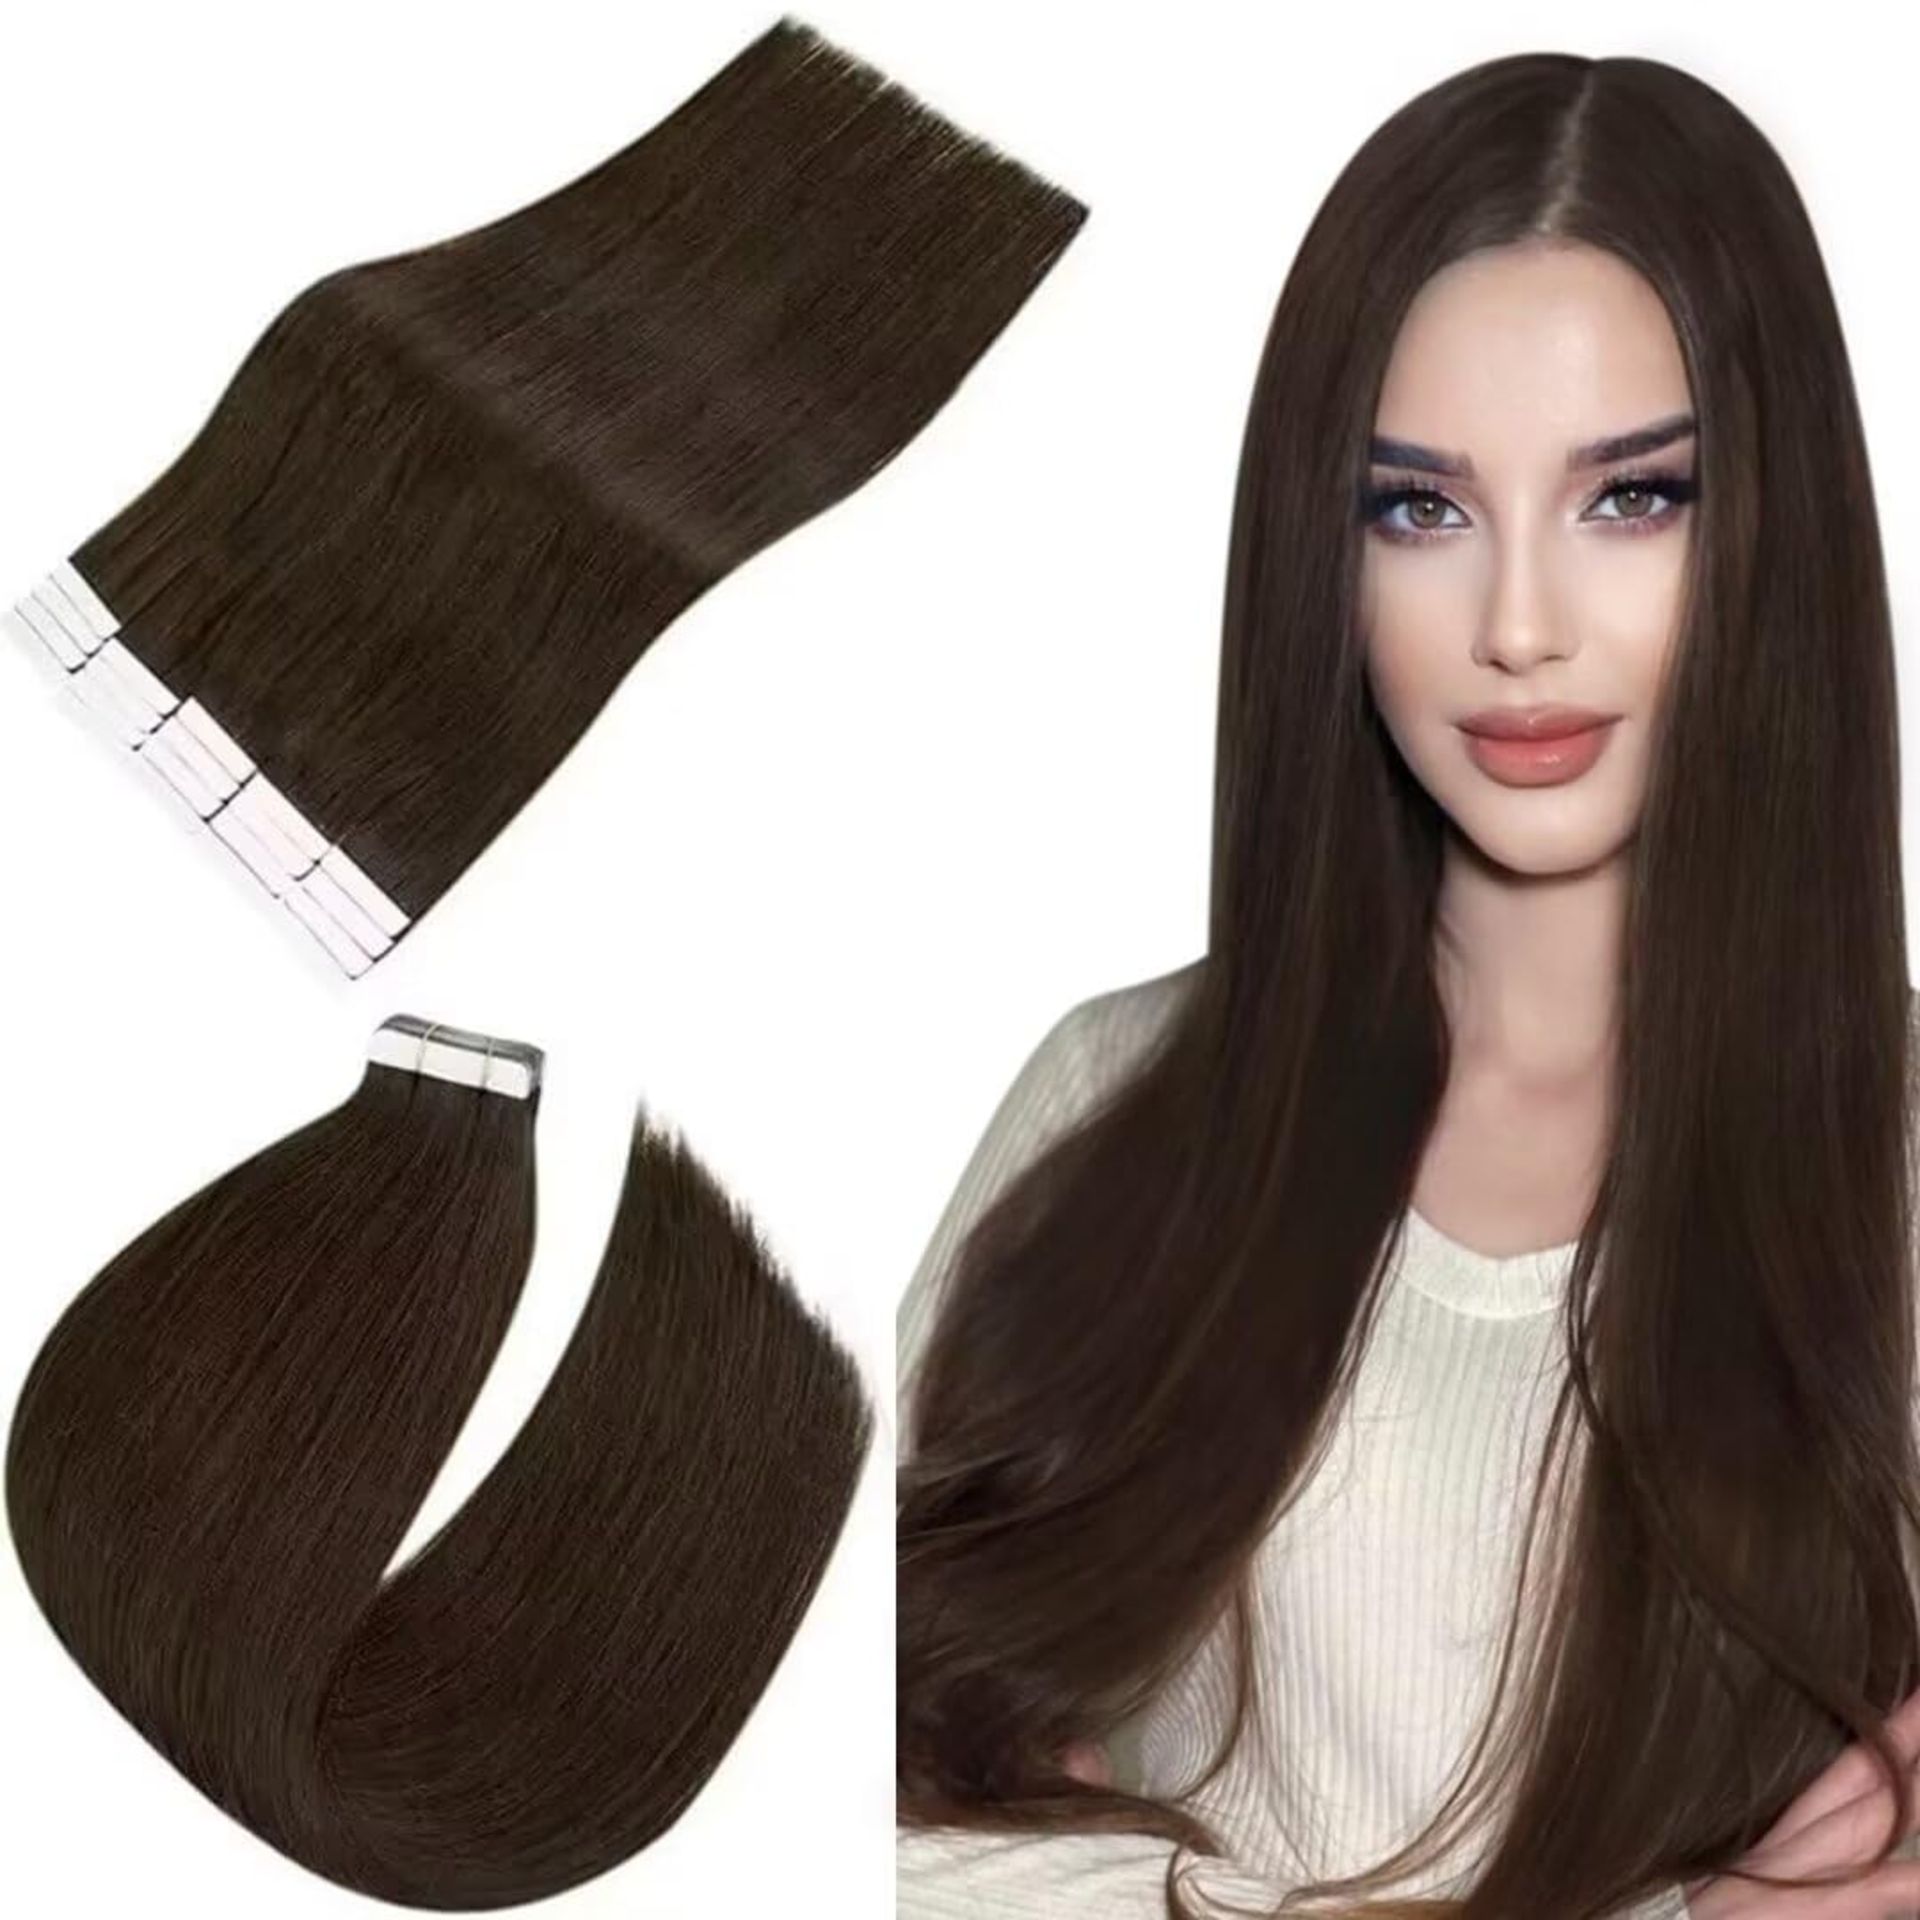 RRP £29.67 Easyouth Tape in Hair Extensions Human Hair Brown Glue - Image 2 of 3